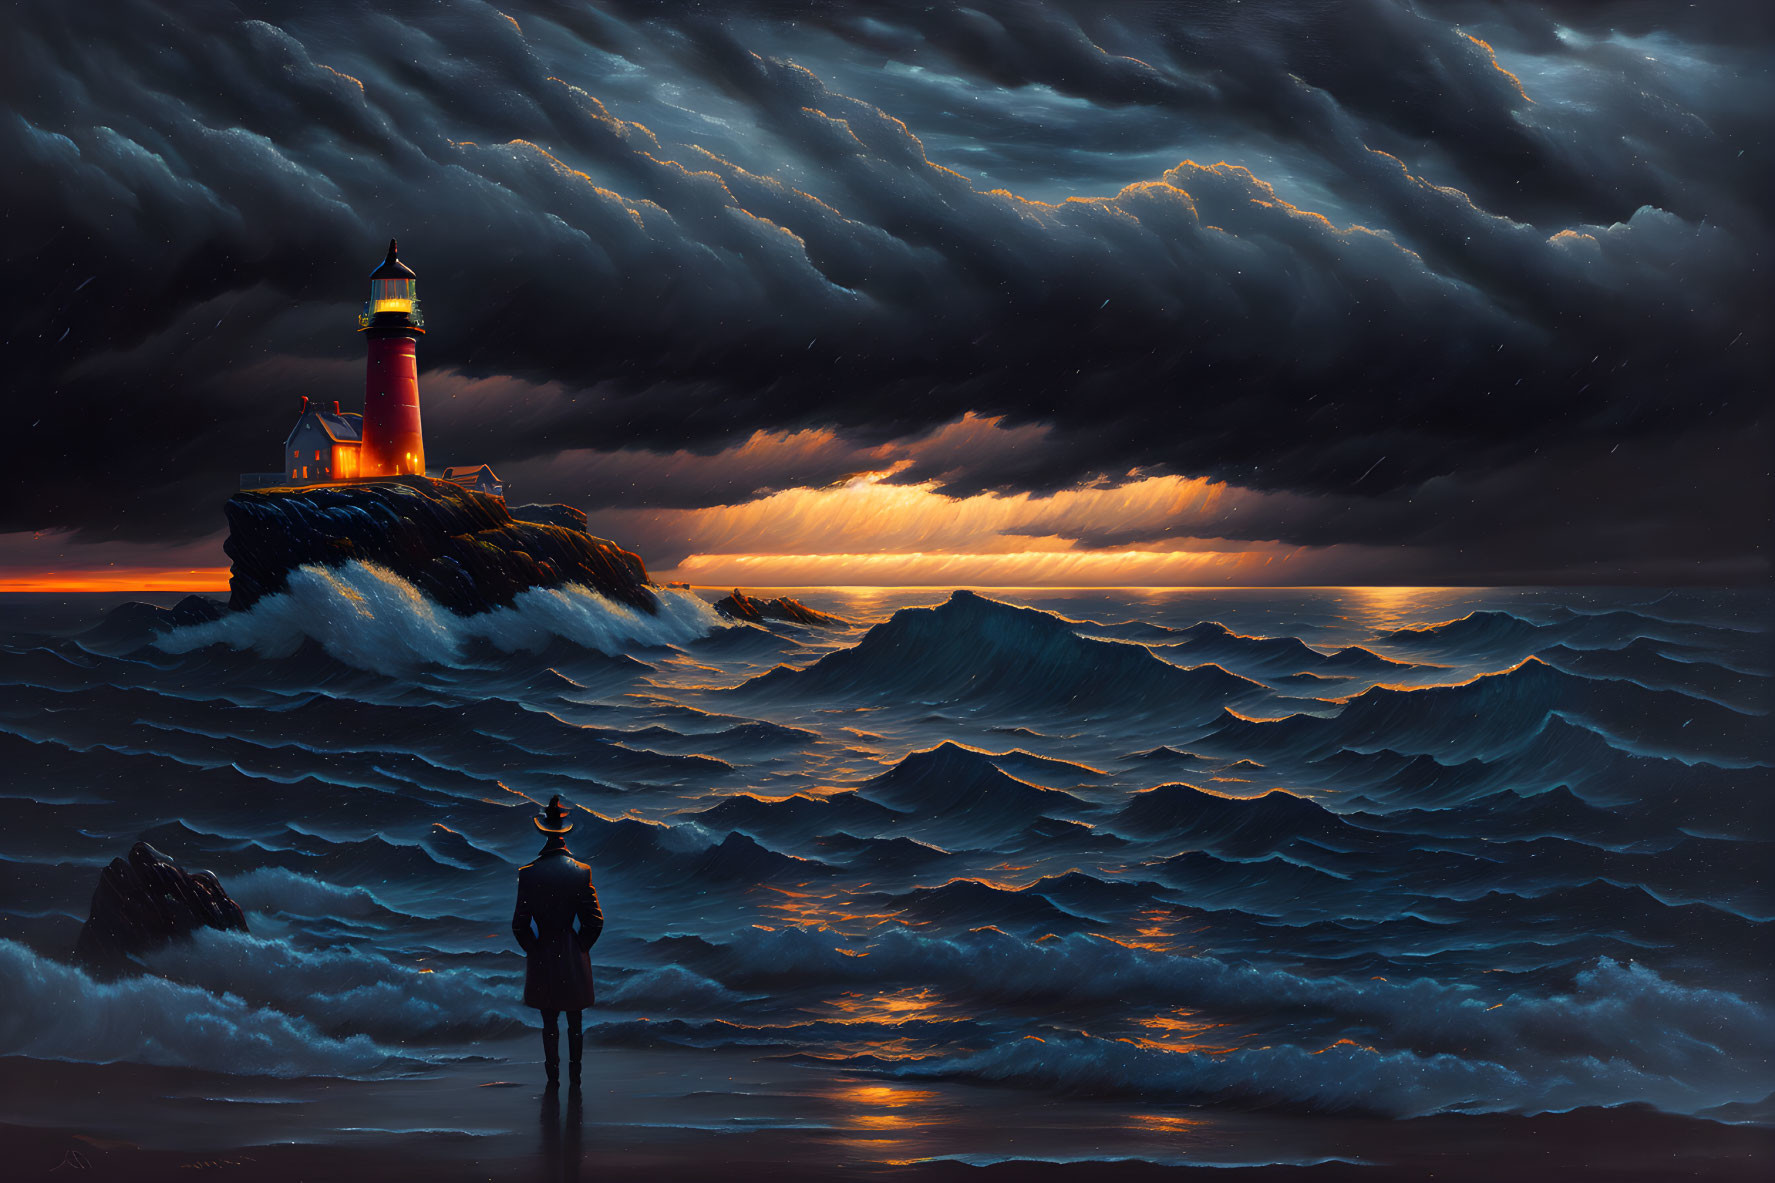 Person admiring stormy sea at night with distant lighthouse and sunset clouds.